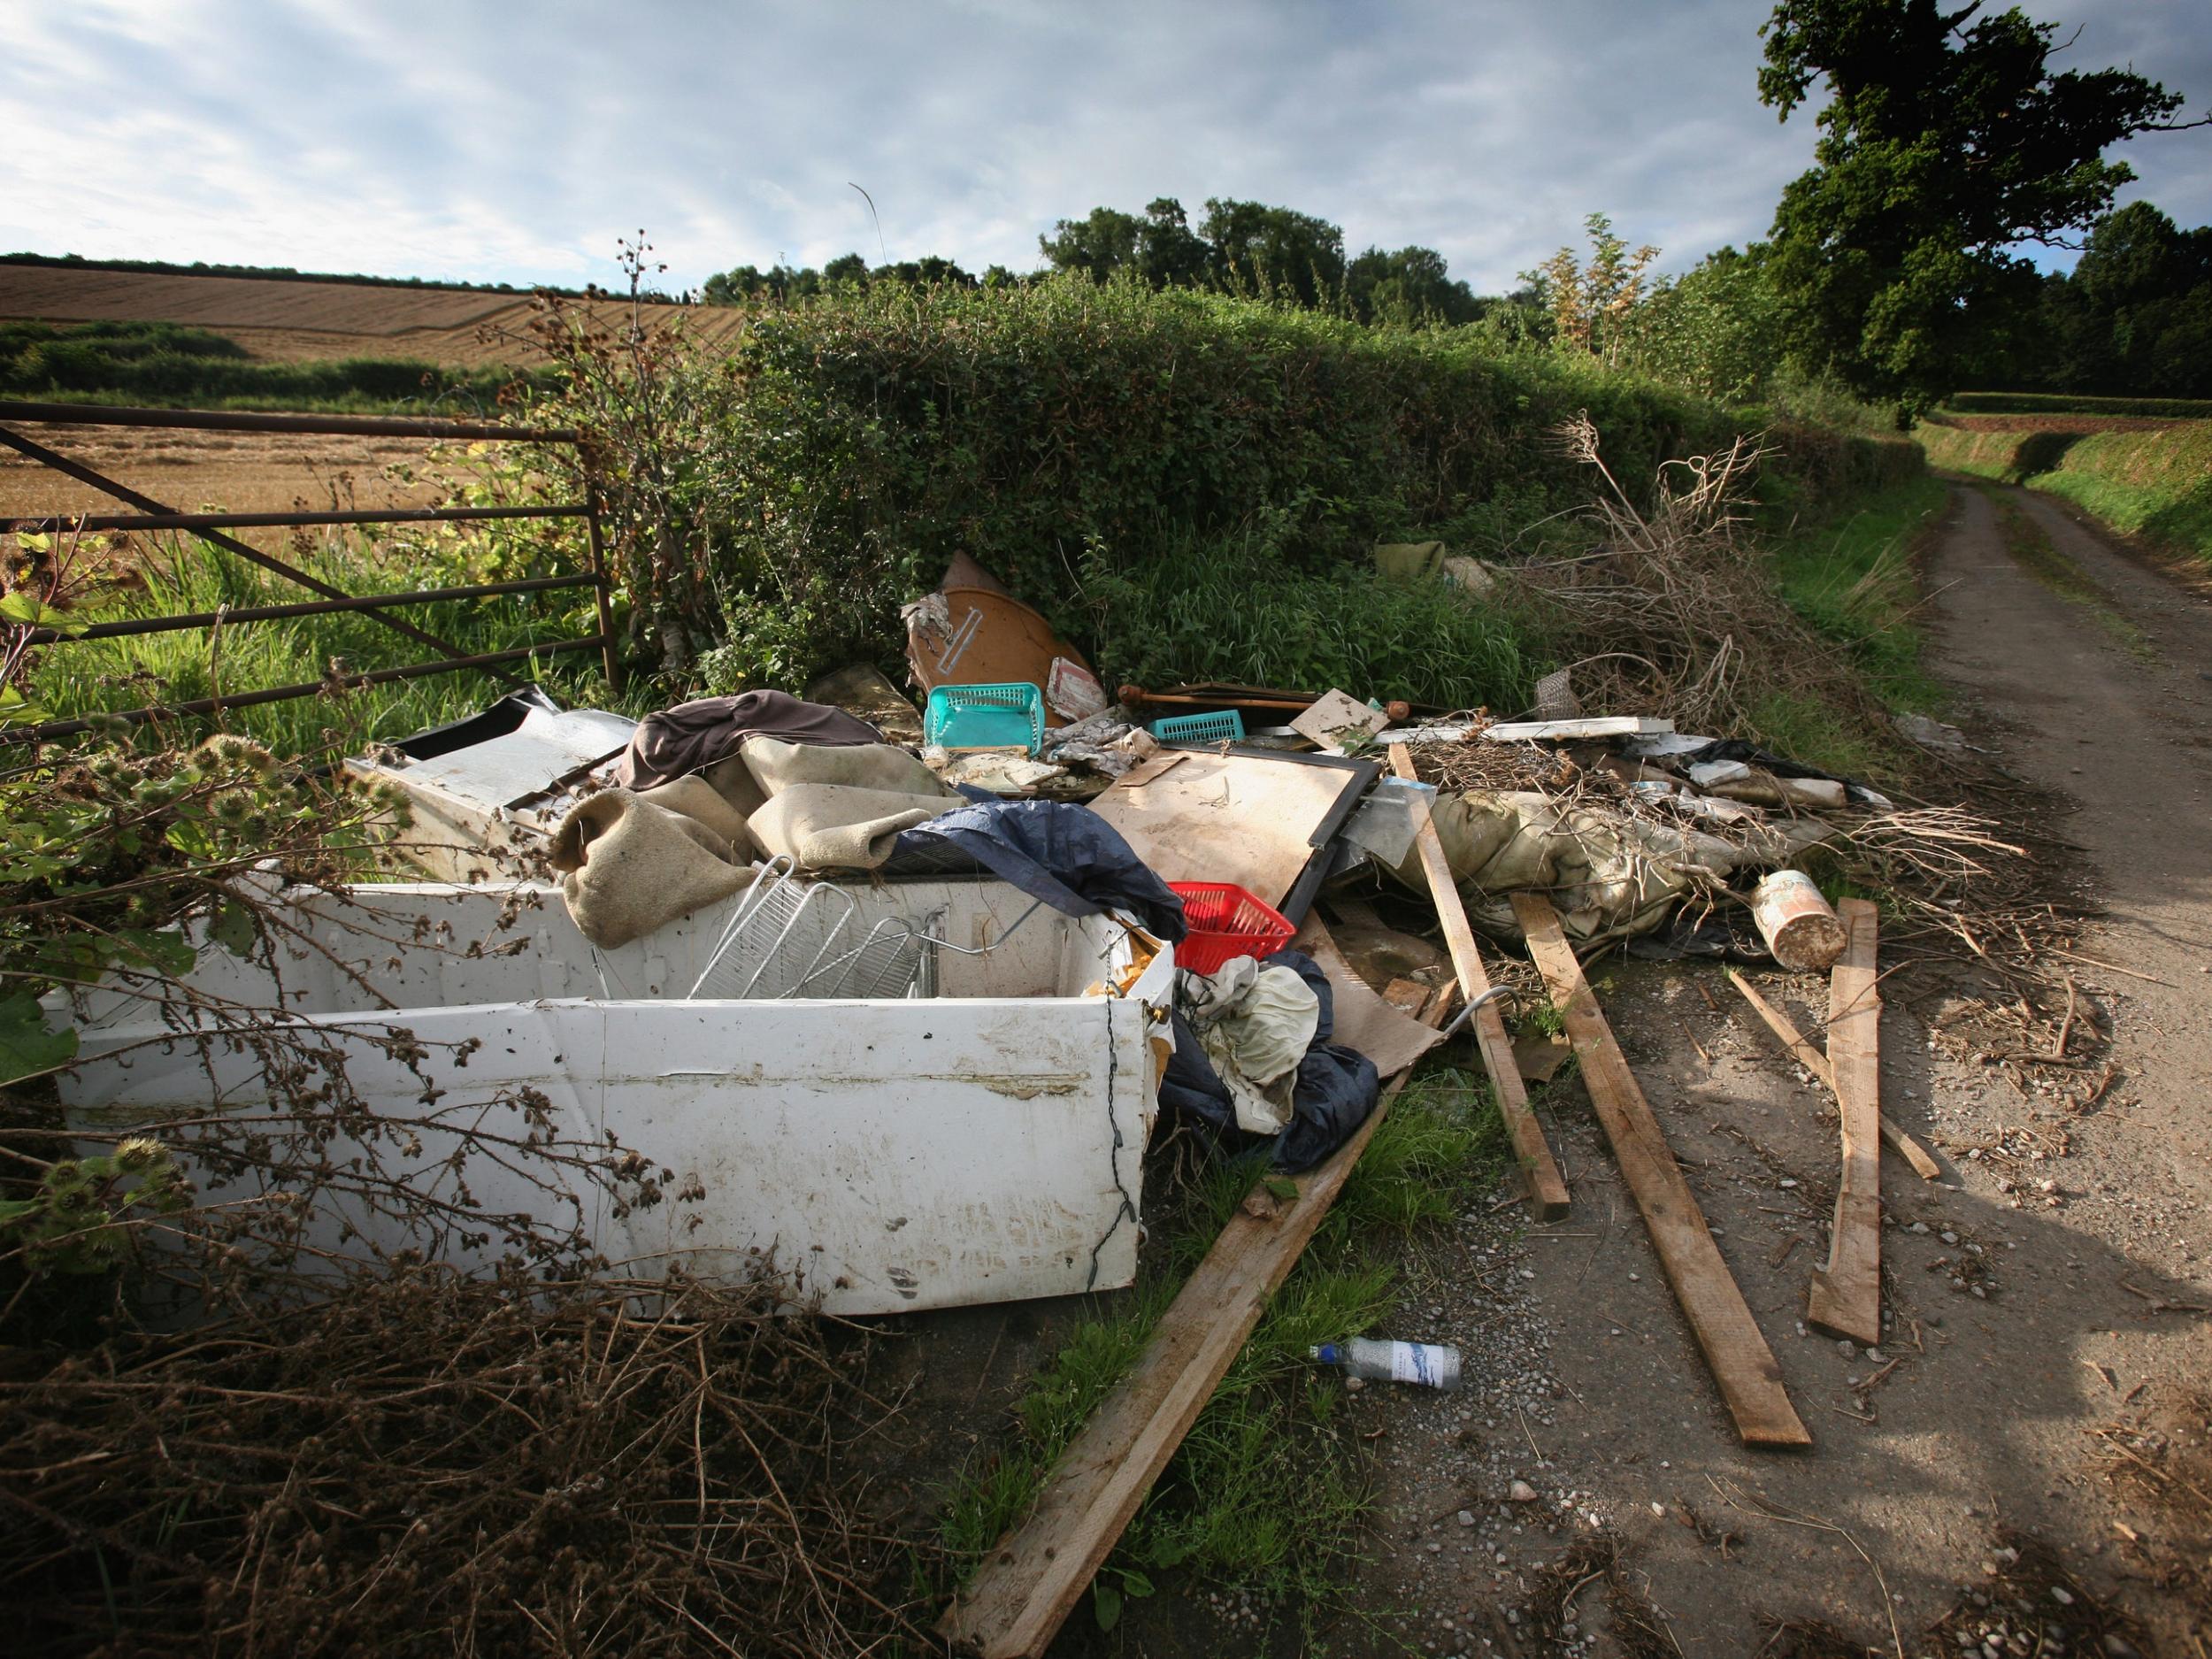 Fly-tippers cause a nuisance to residents, especially in rural areas